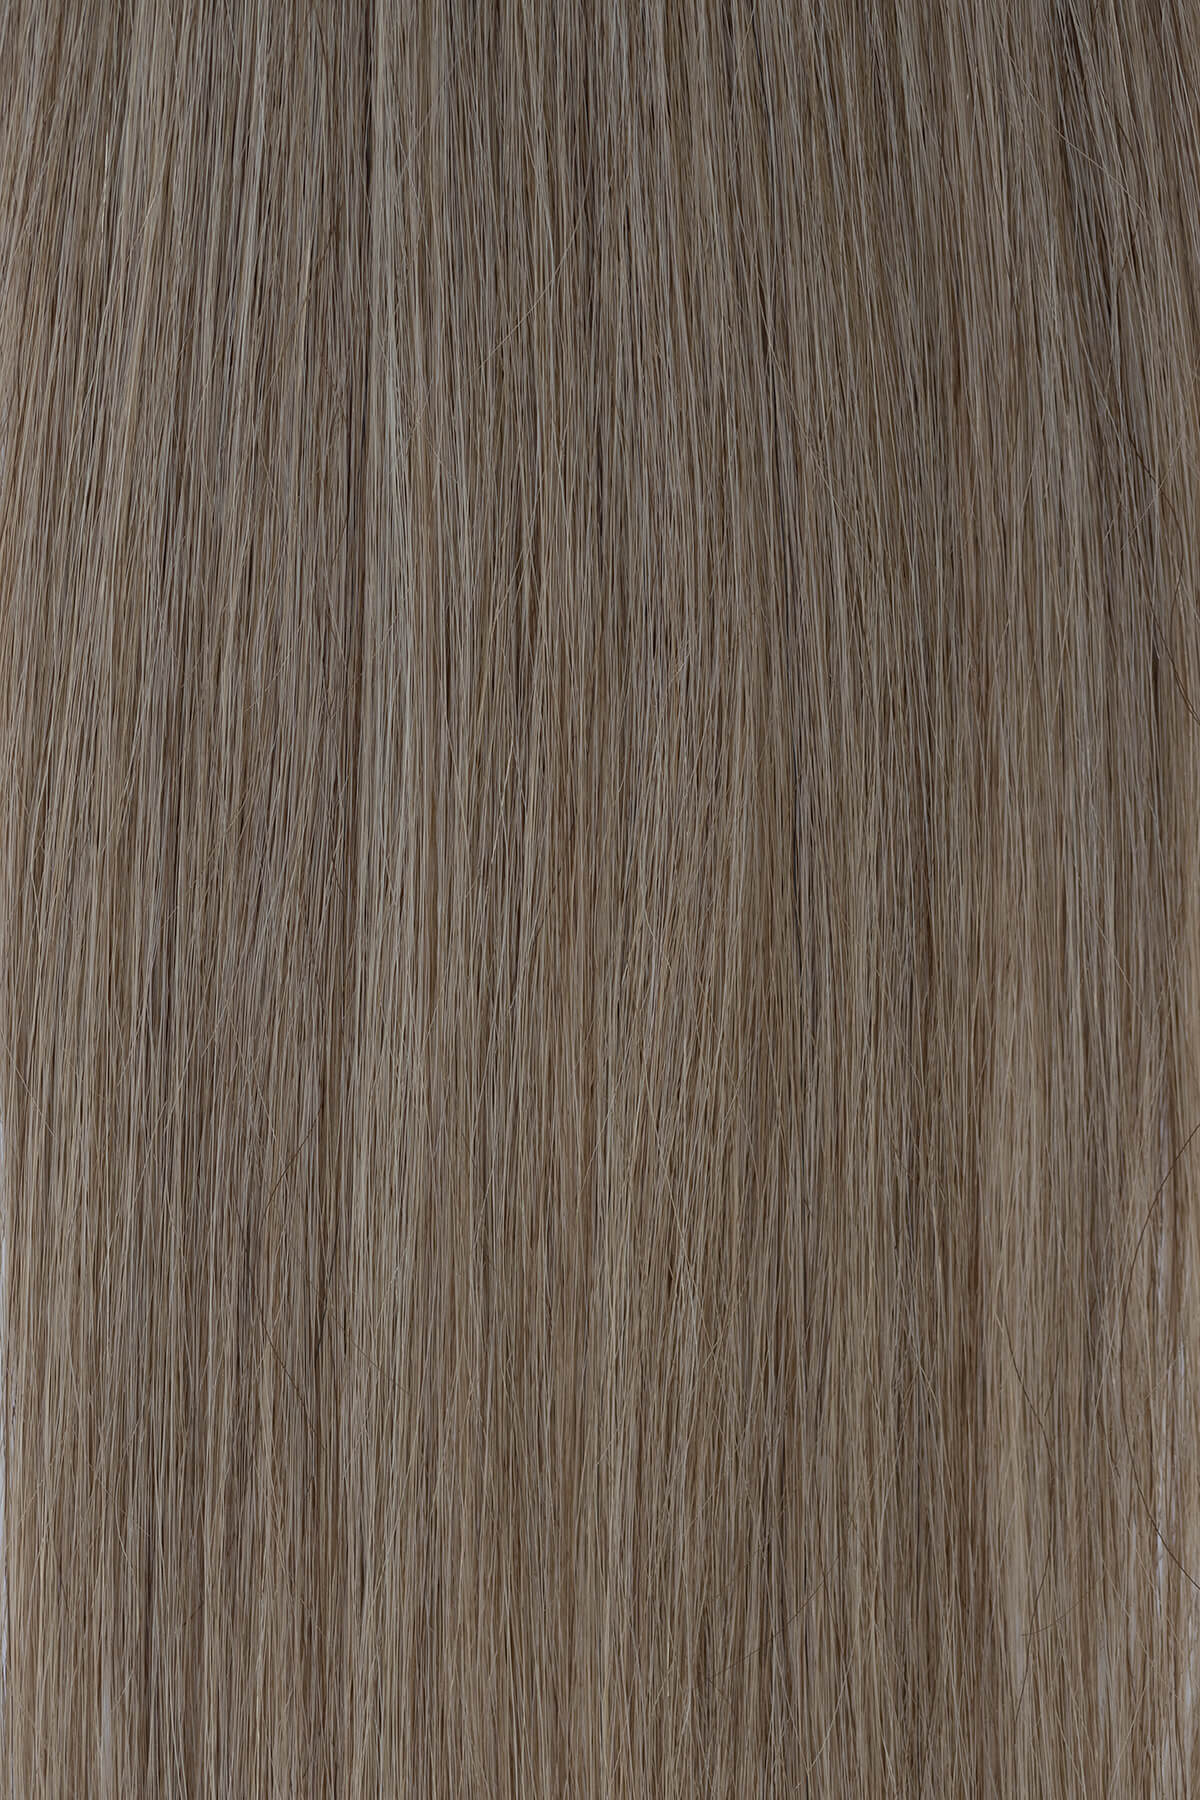 Simple Vamp Up Clip-In Extensions | Dover - Ash Blonde